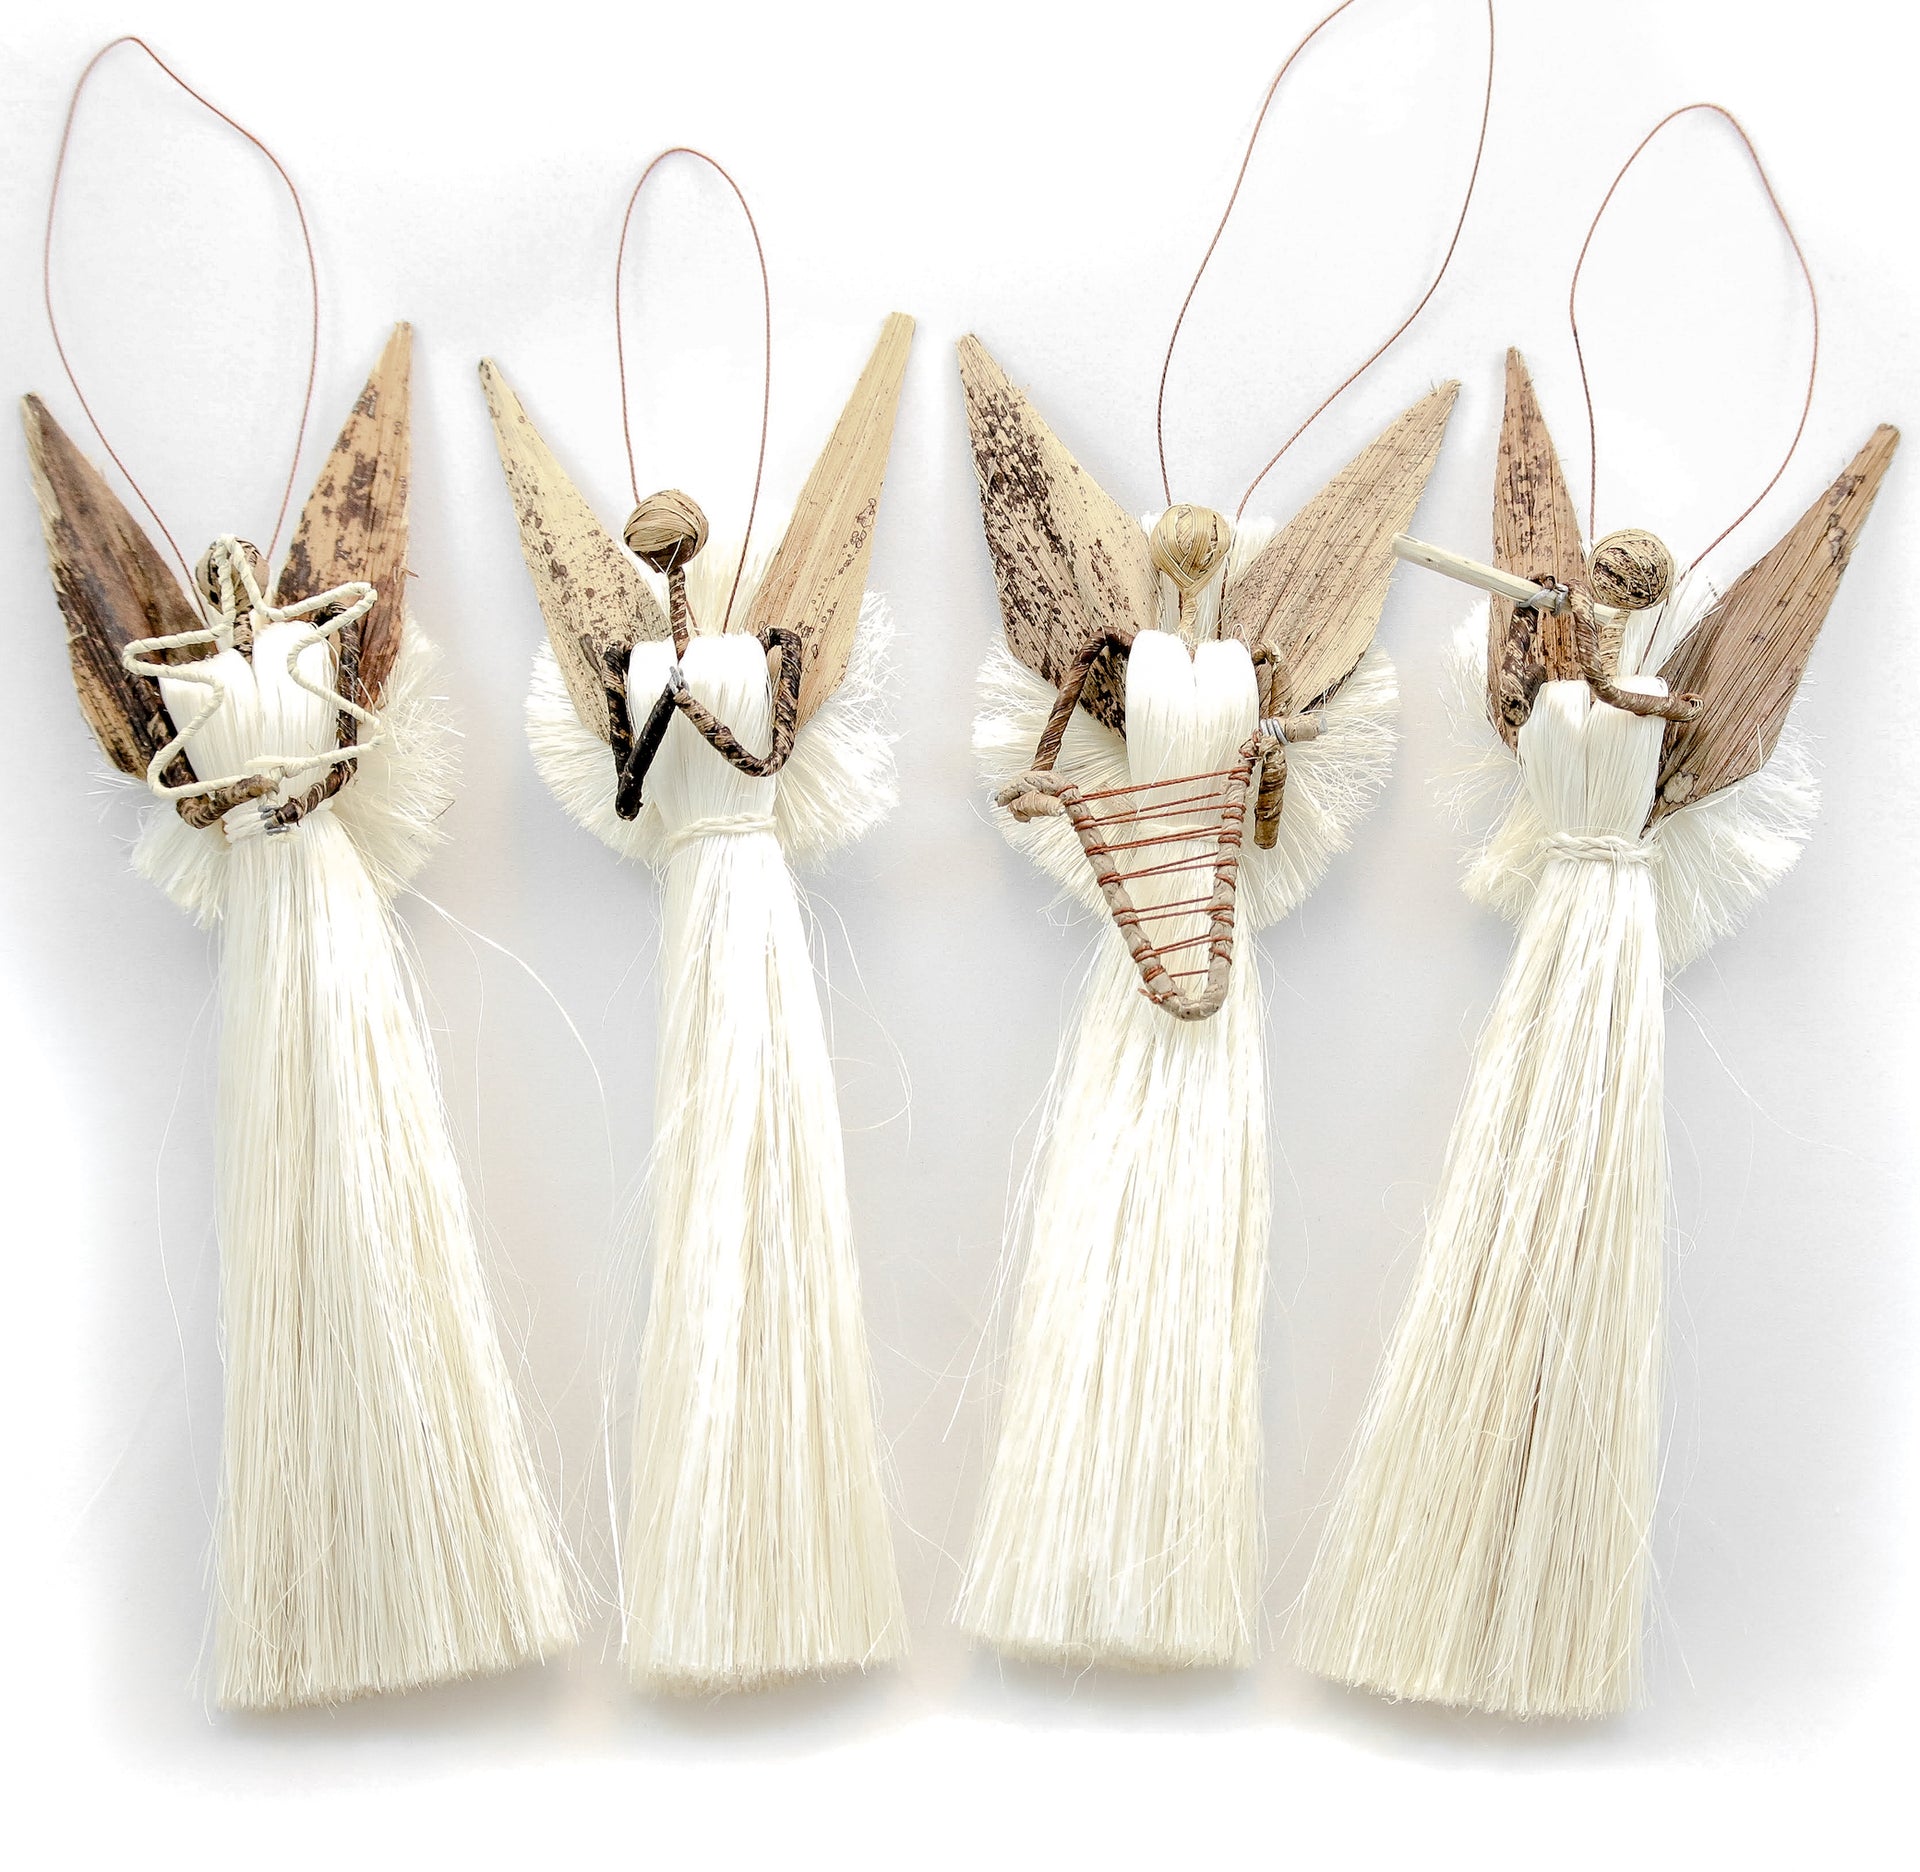 Natural Angel Ornament Set handmade in Africa by Ornaments 4 Orphans